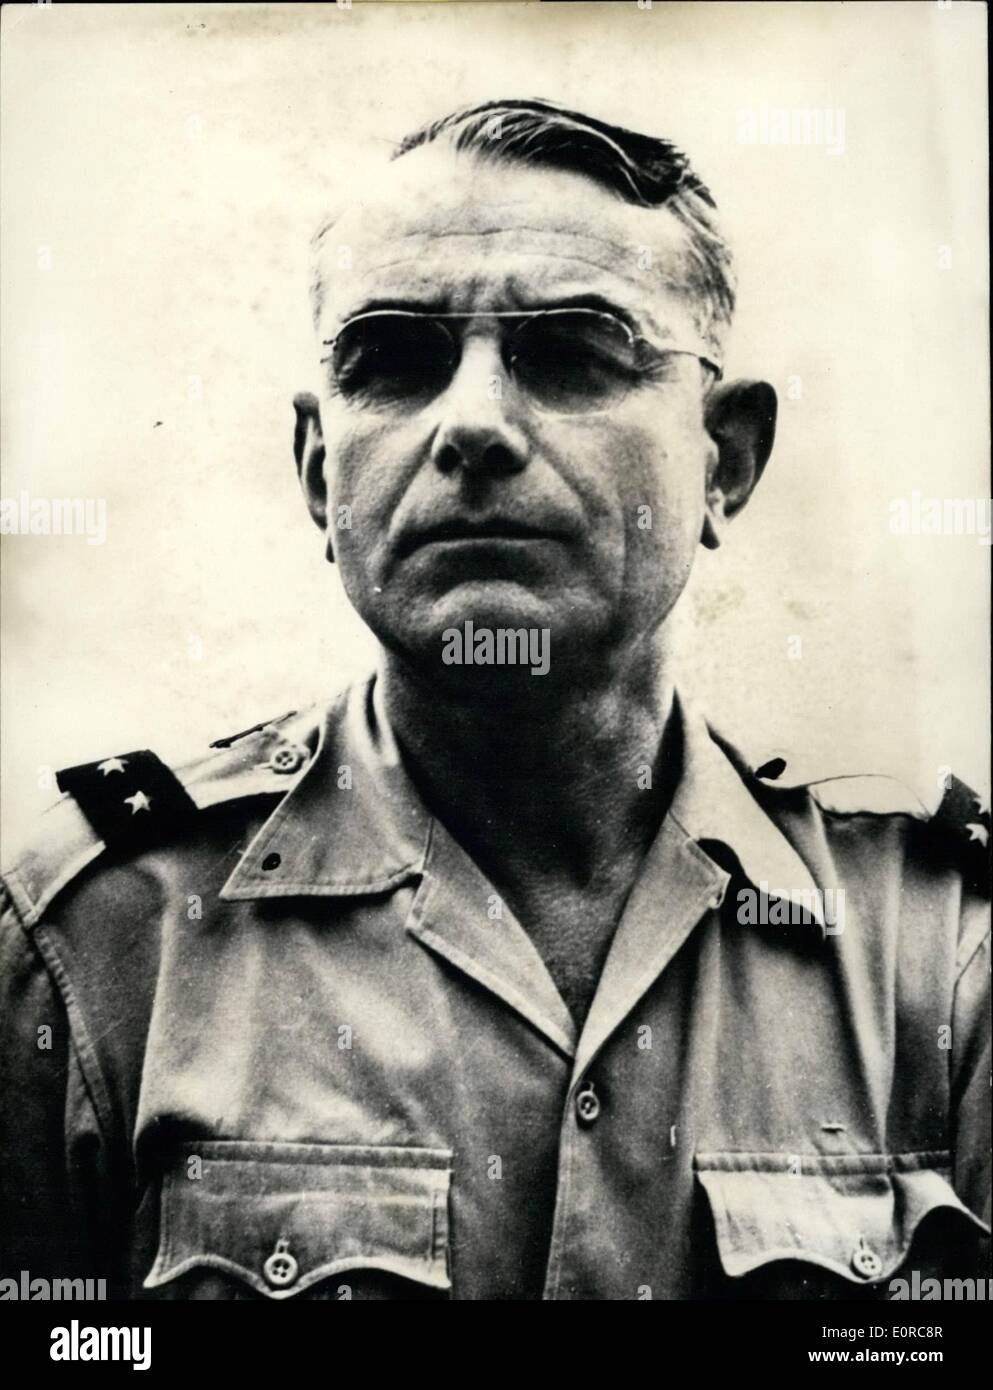 Dec. 12, 1958 - DE Gaulle's Presidential Cabinet. Photo shows A Recent Portrait of General DEA Beaufort appointed as chief of De Gaulle's Military Houe. Stock Photo